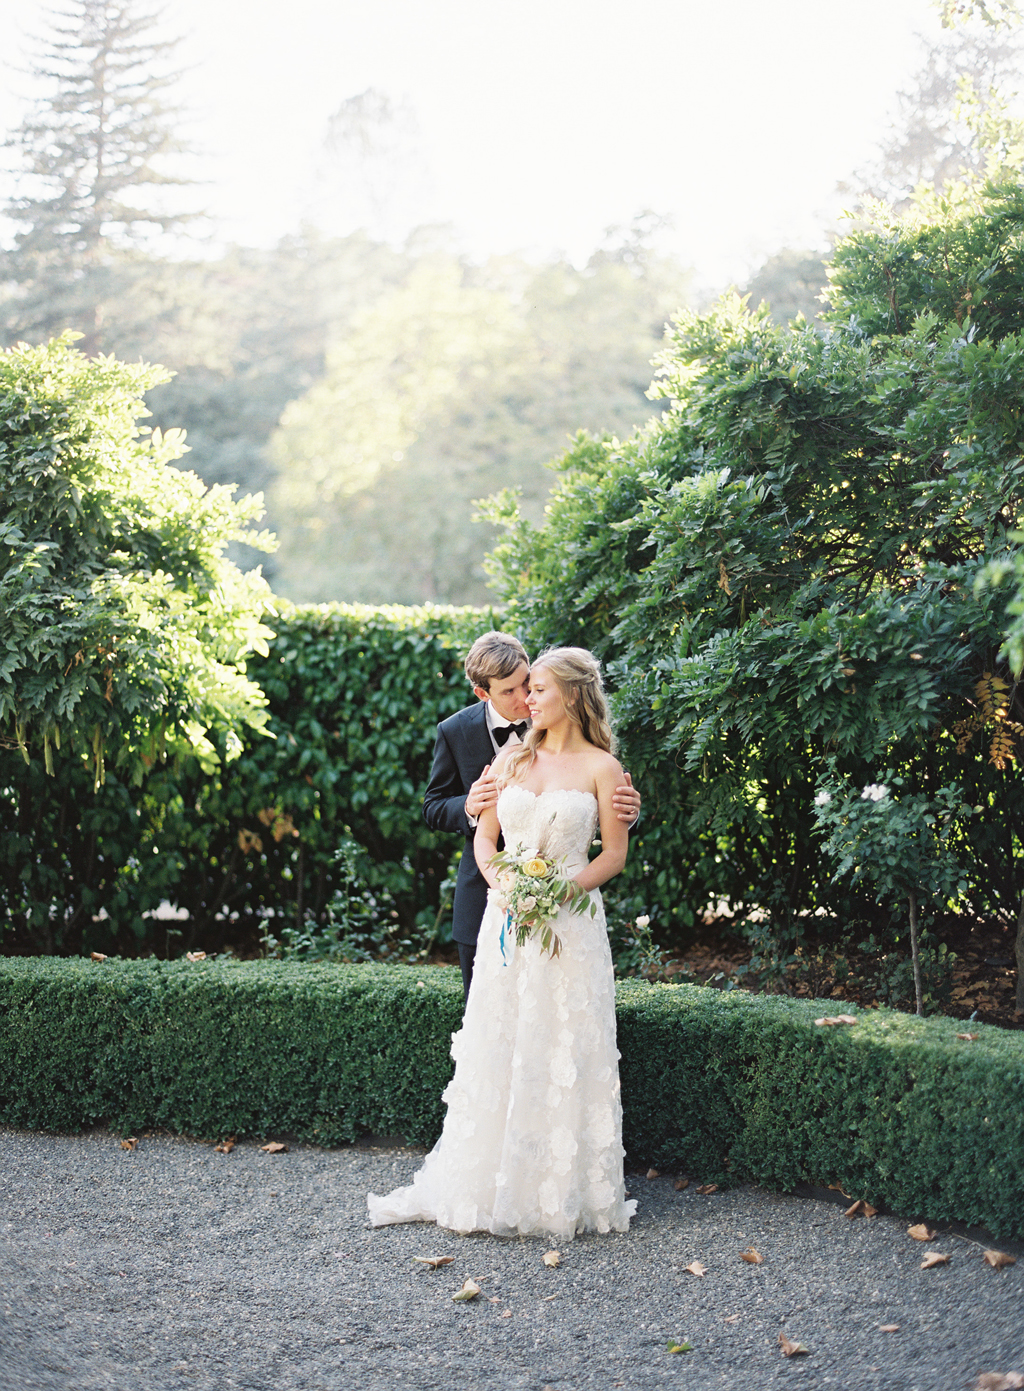 bride and groom portrait shot on fuji 400h at beaulieu gardens in Napa wine country